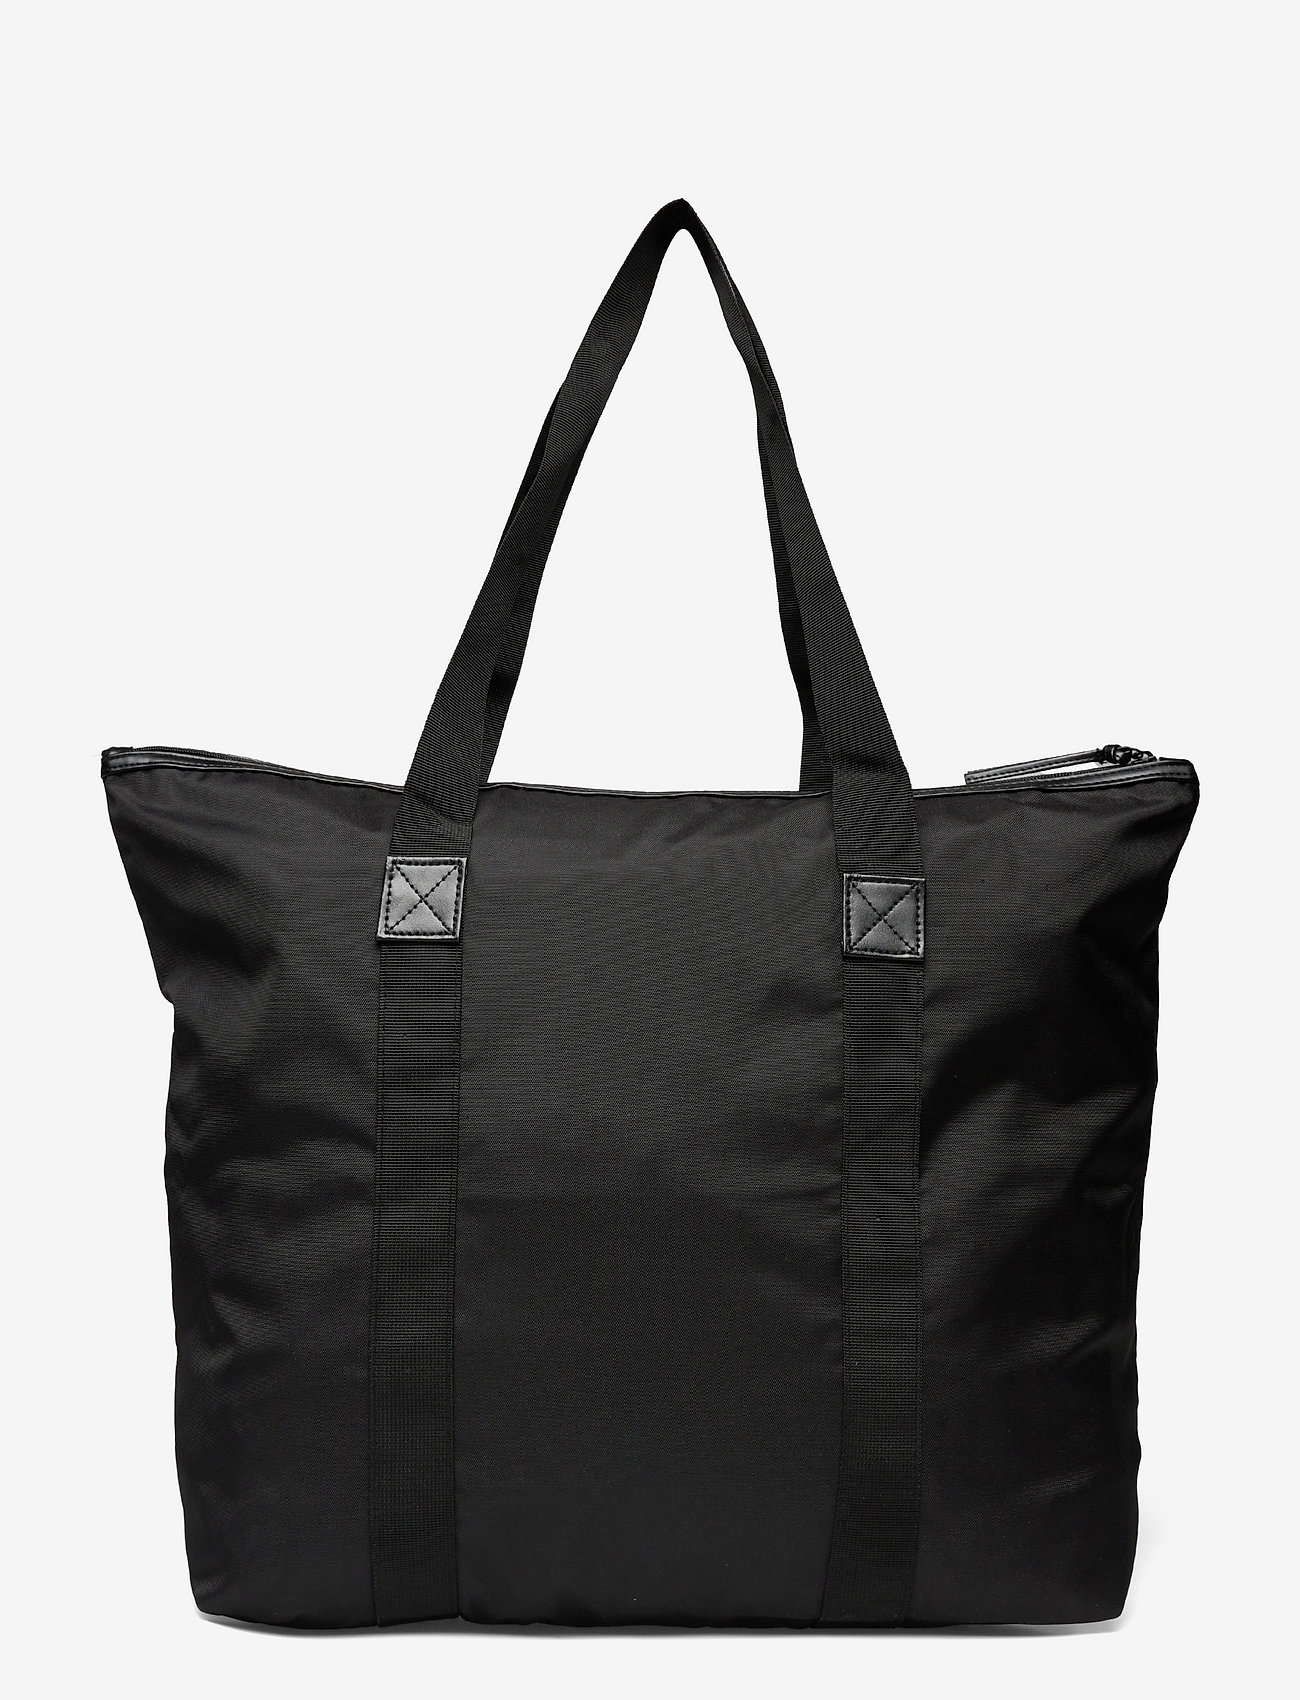 DAY ET - Day Gweneth RE-S Bag - tote bags - black - 1